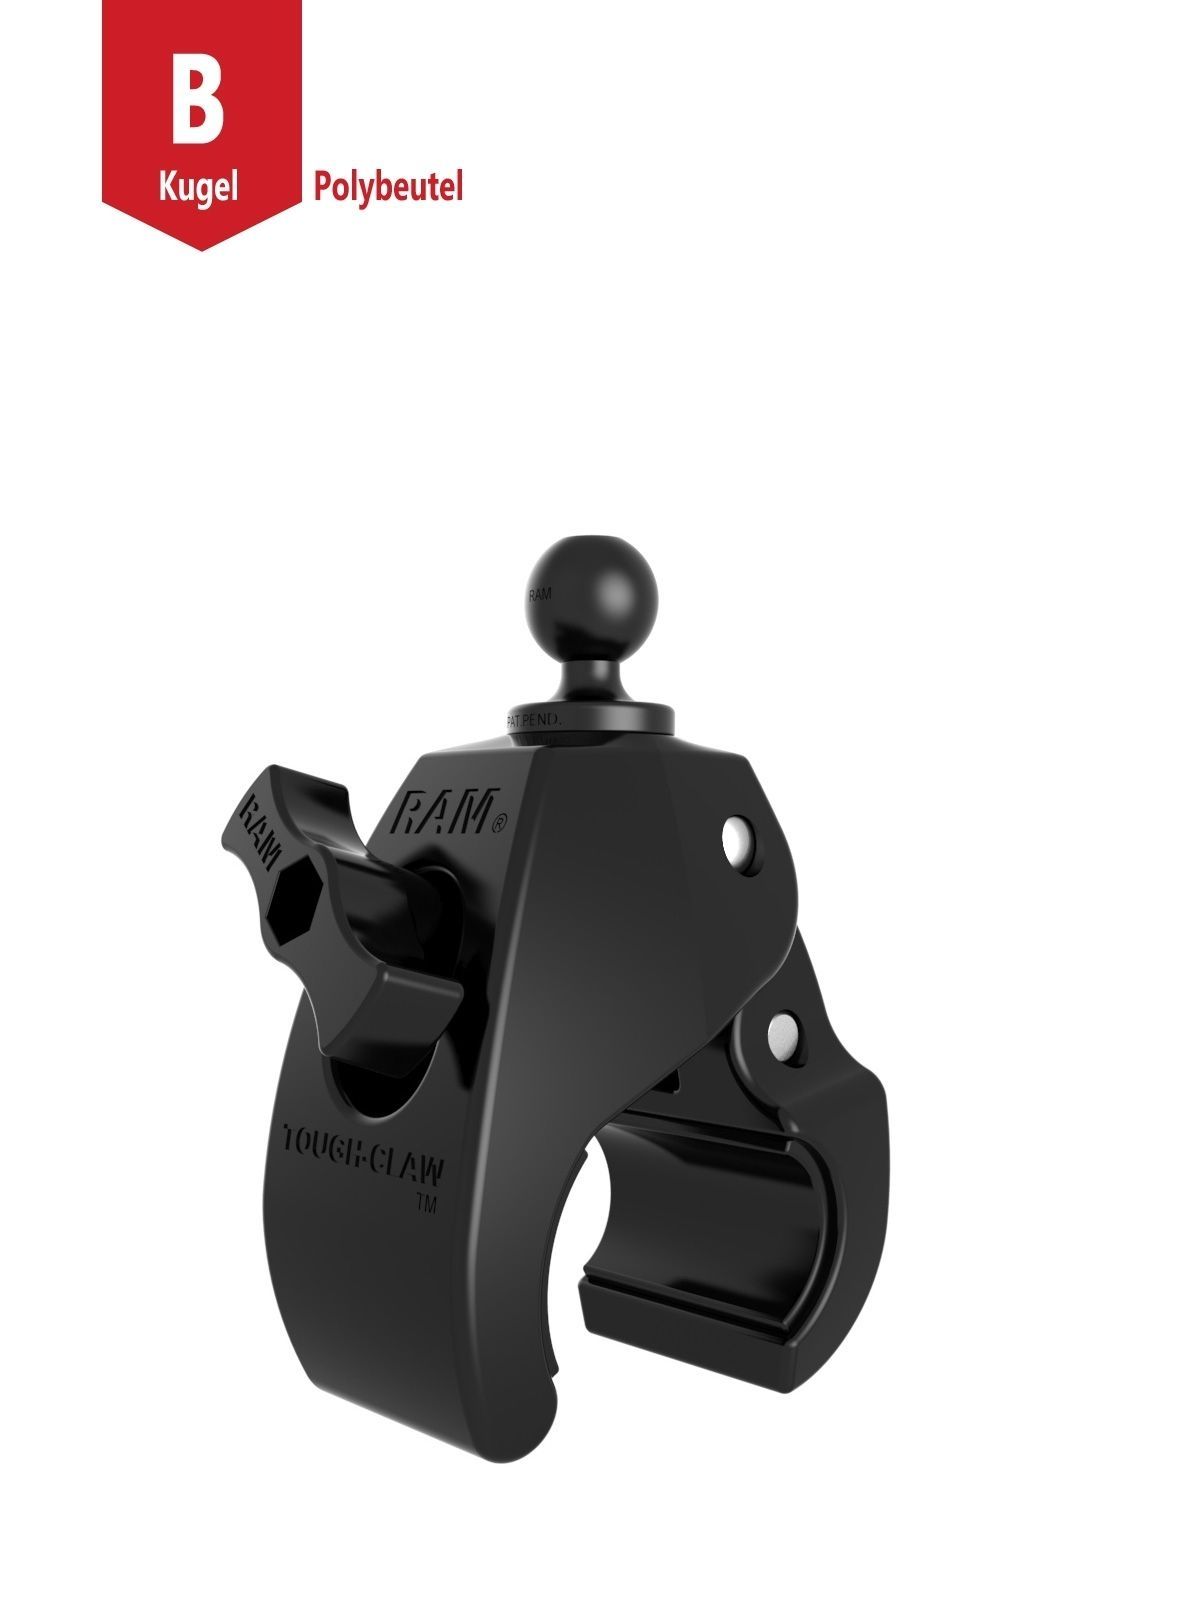 RAM MOUNTS Large Tough-Claw with 1" Ball (B)